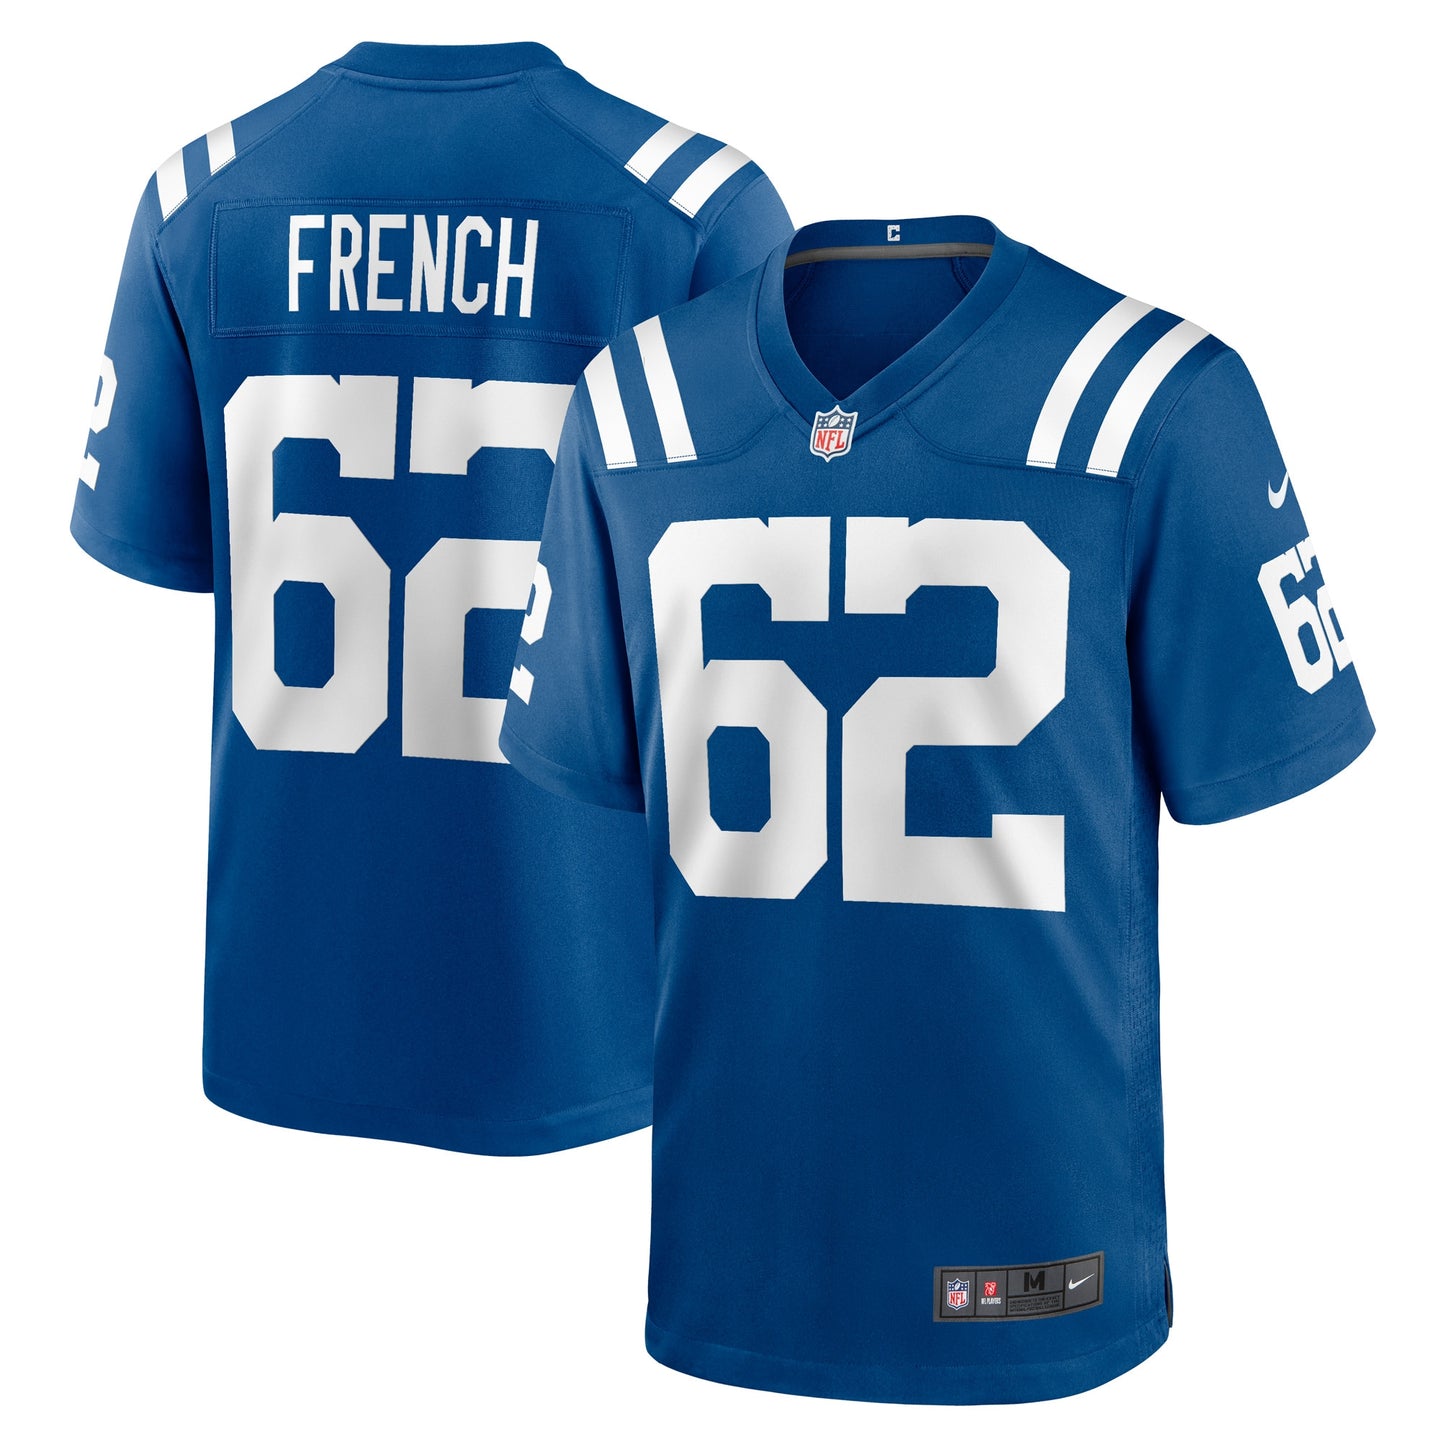 Wesley French Indianapolis Colts Nike Game Player Jersey - Royal